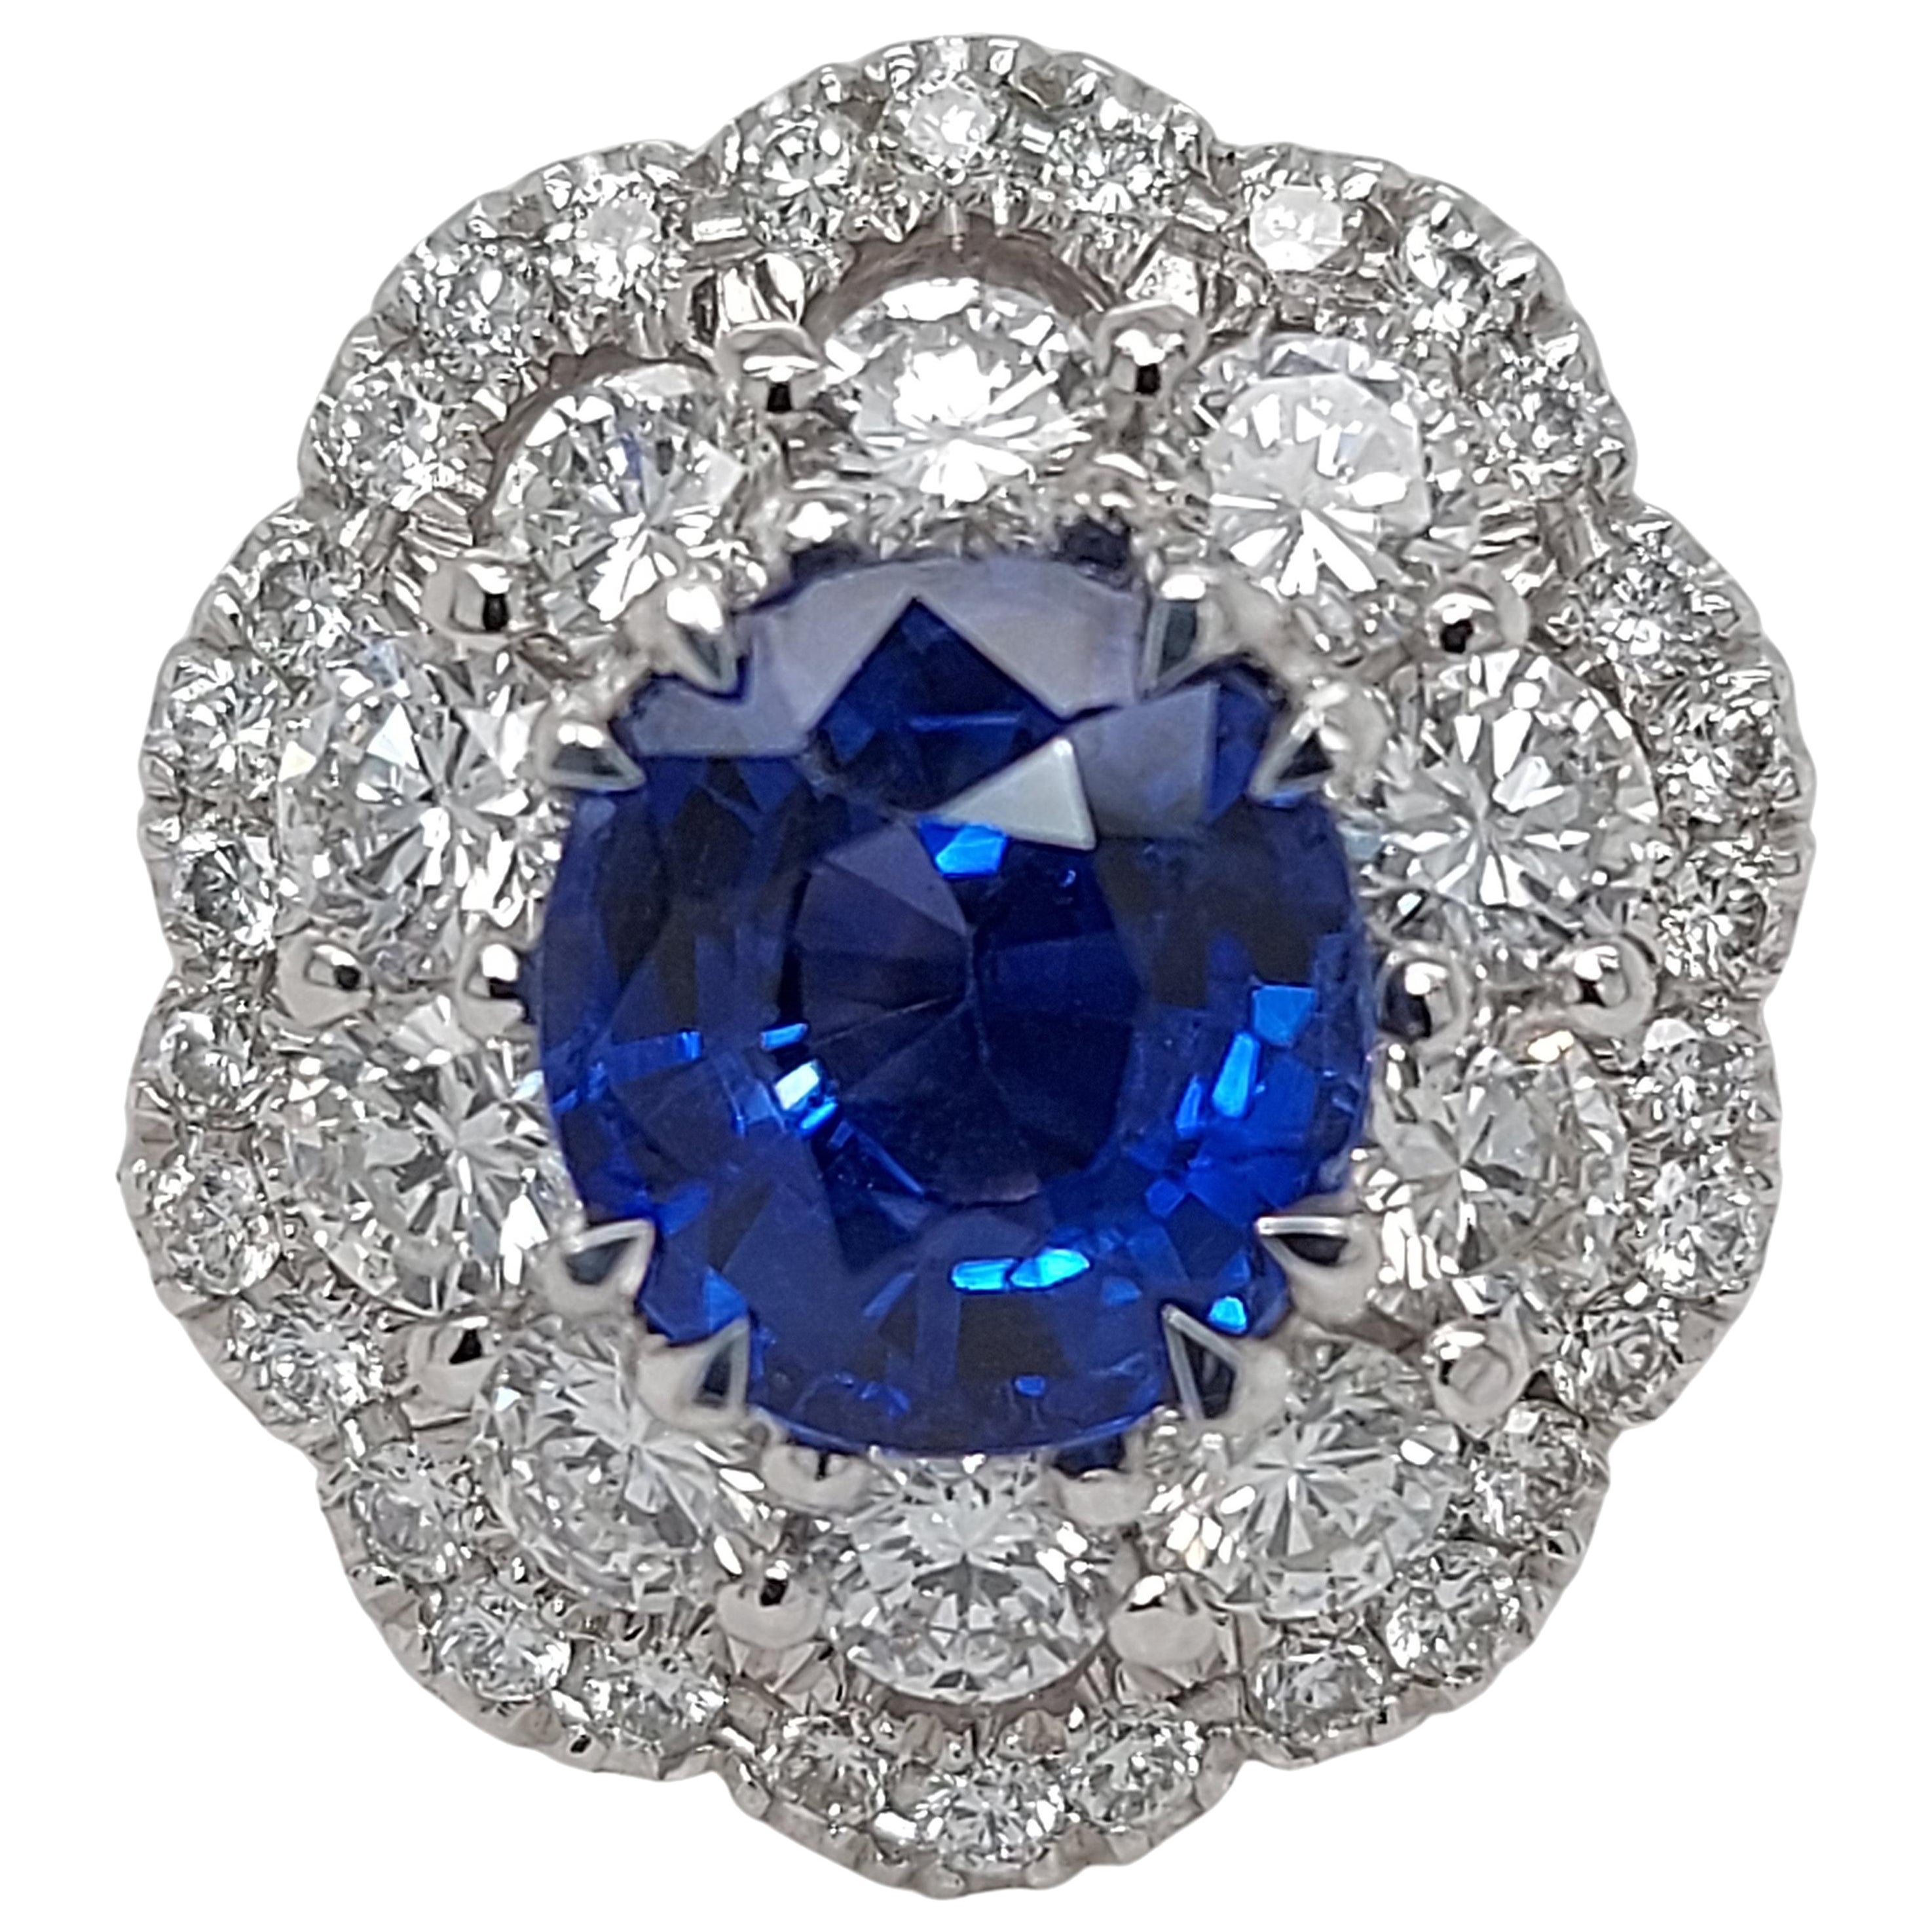 Exceptional 18 Karat Gold Ring with 2.43 Carat Sapphire and 1.36 Carat Diamonds